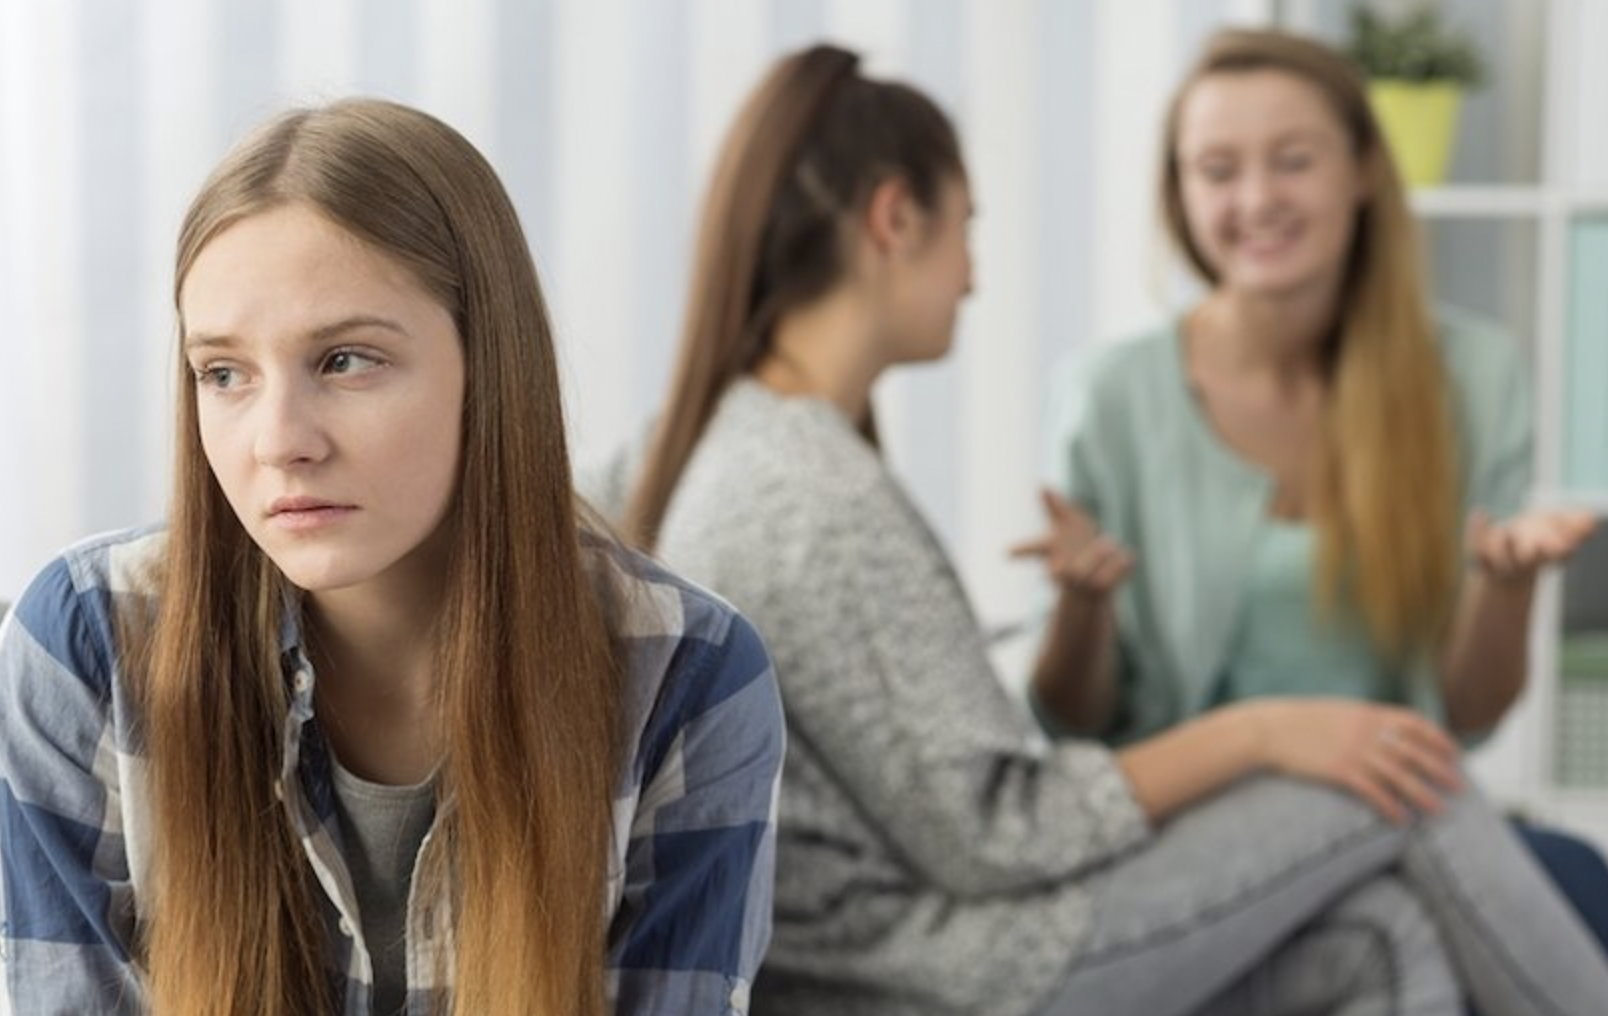 Young girl feeling left out by other girls